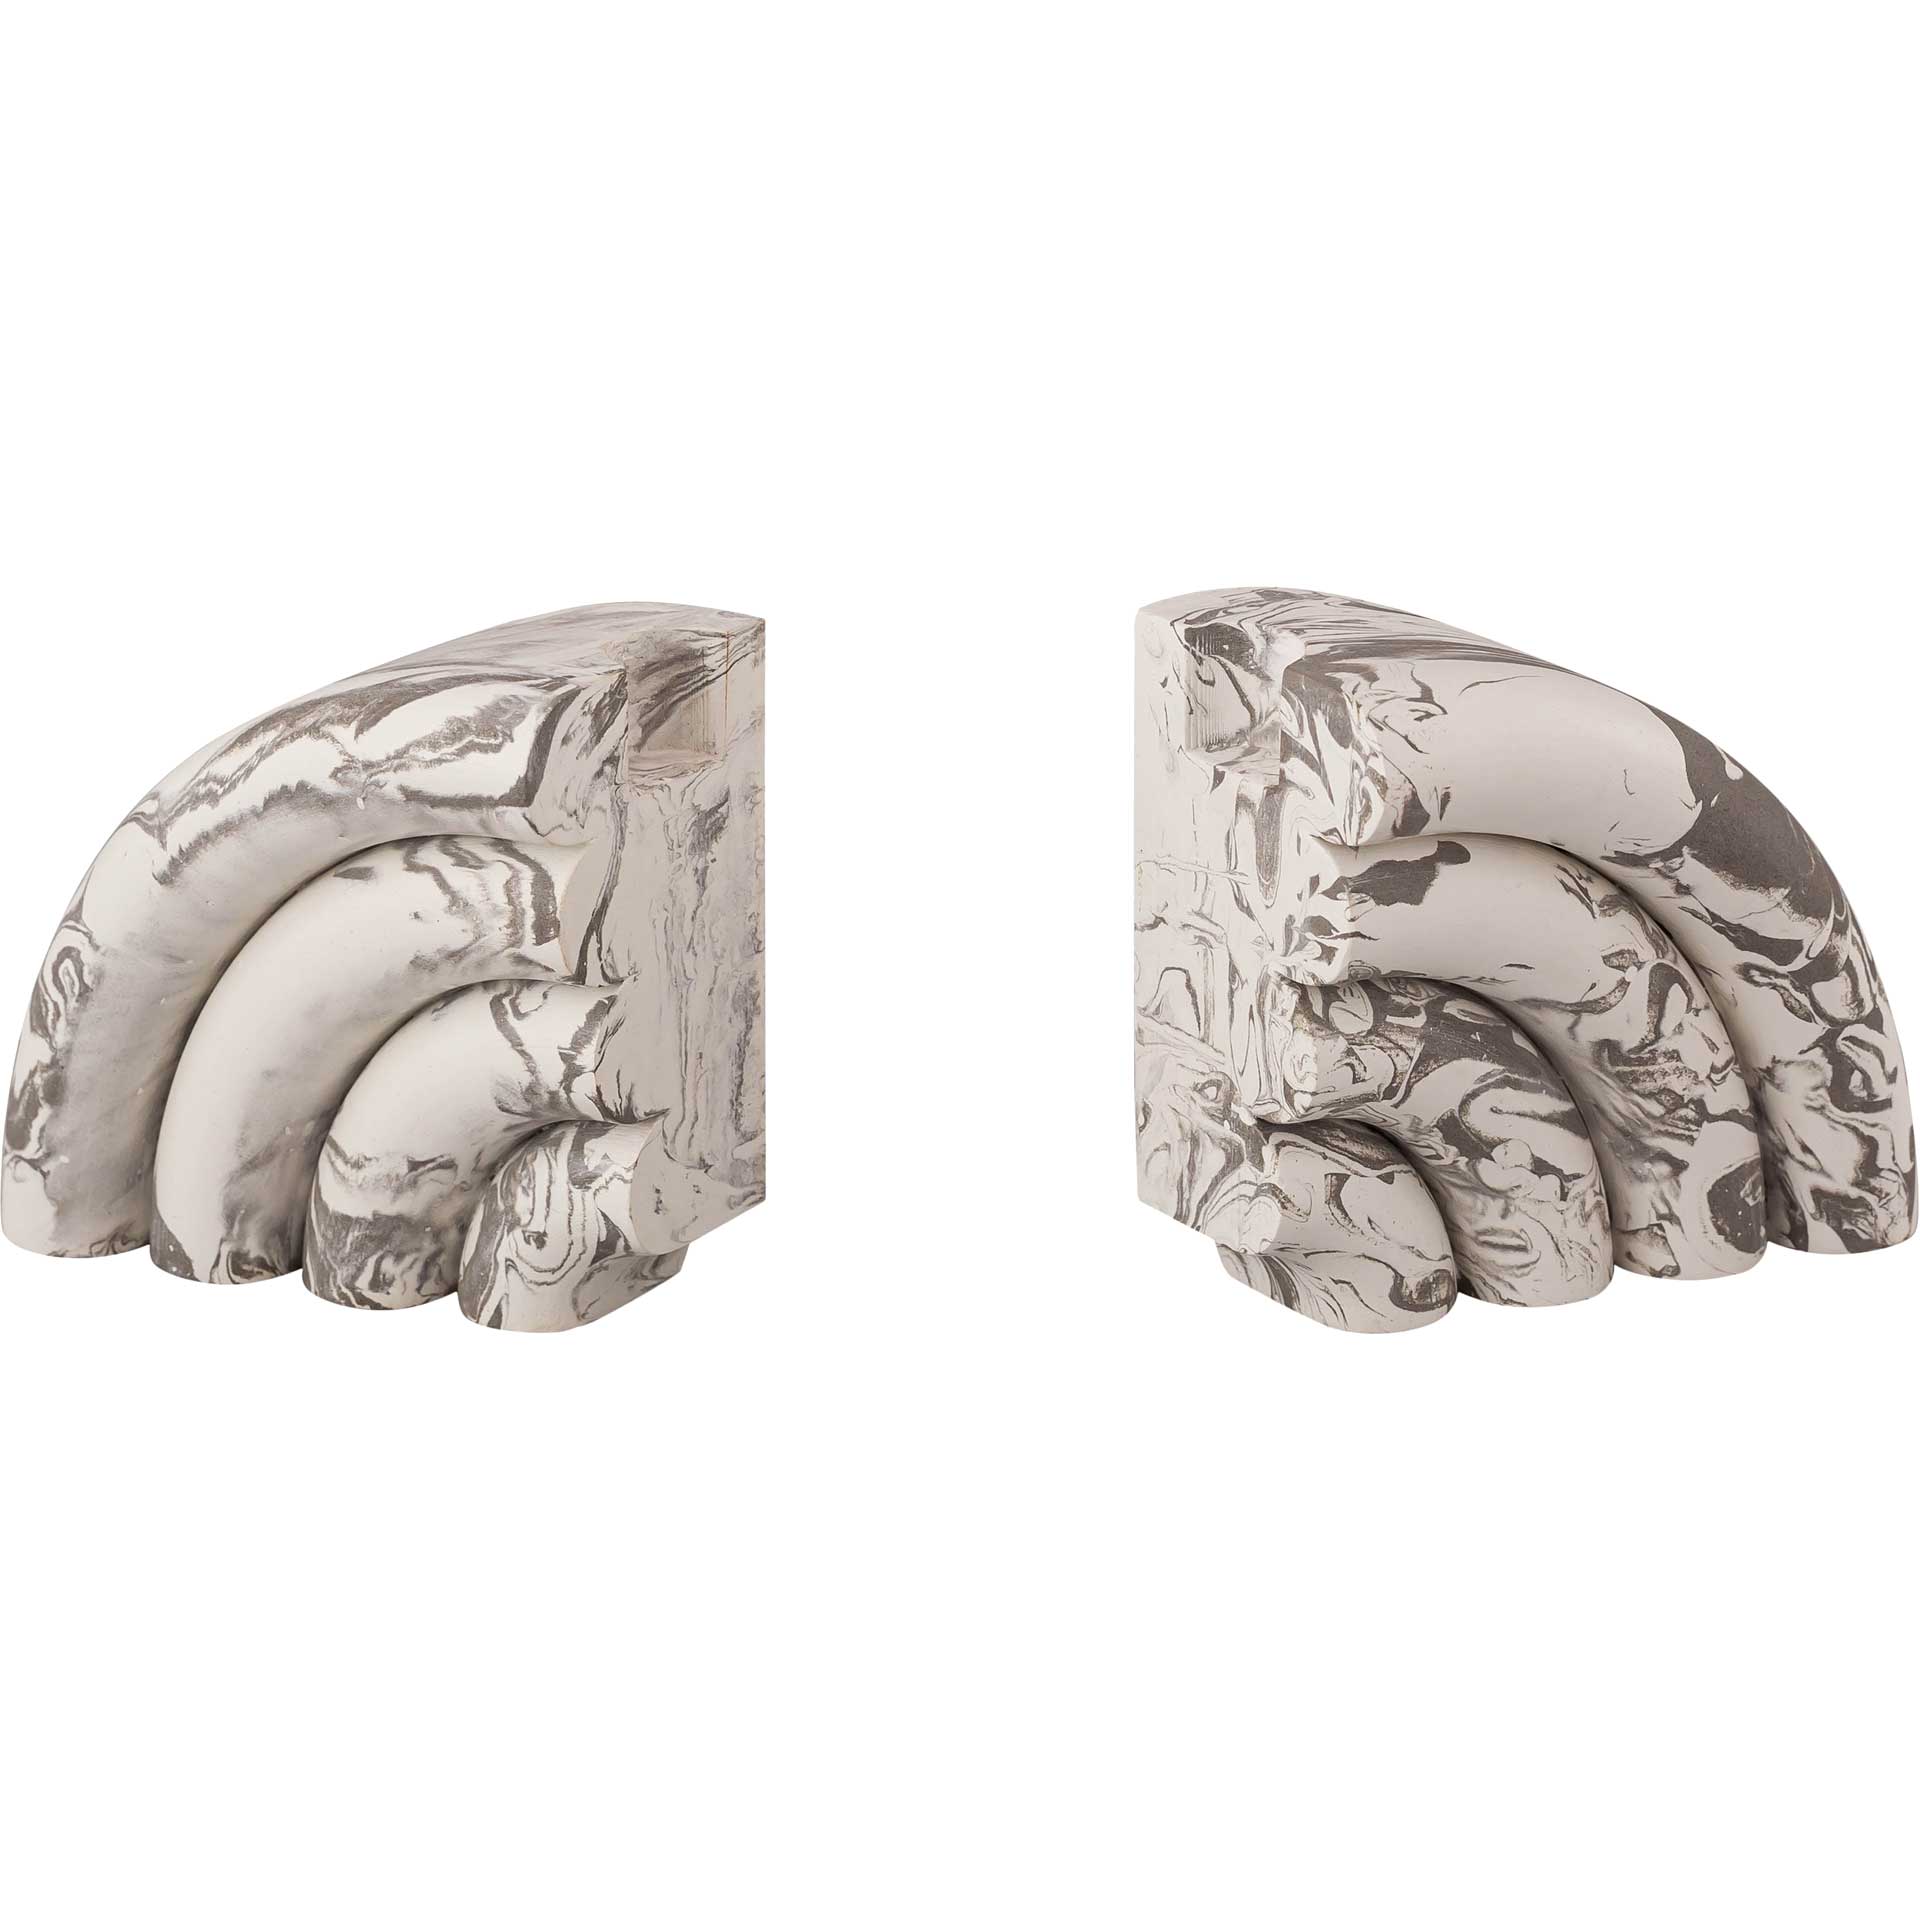 Grania Marble Bookends Gray Marble (Set of 2)